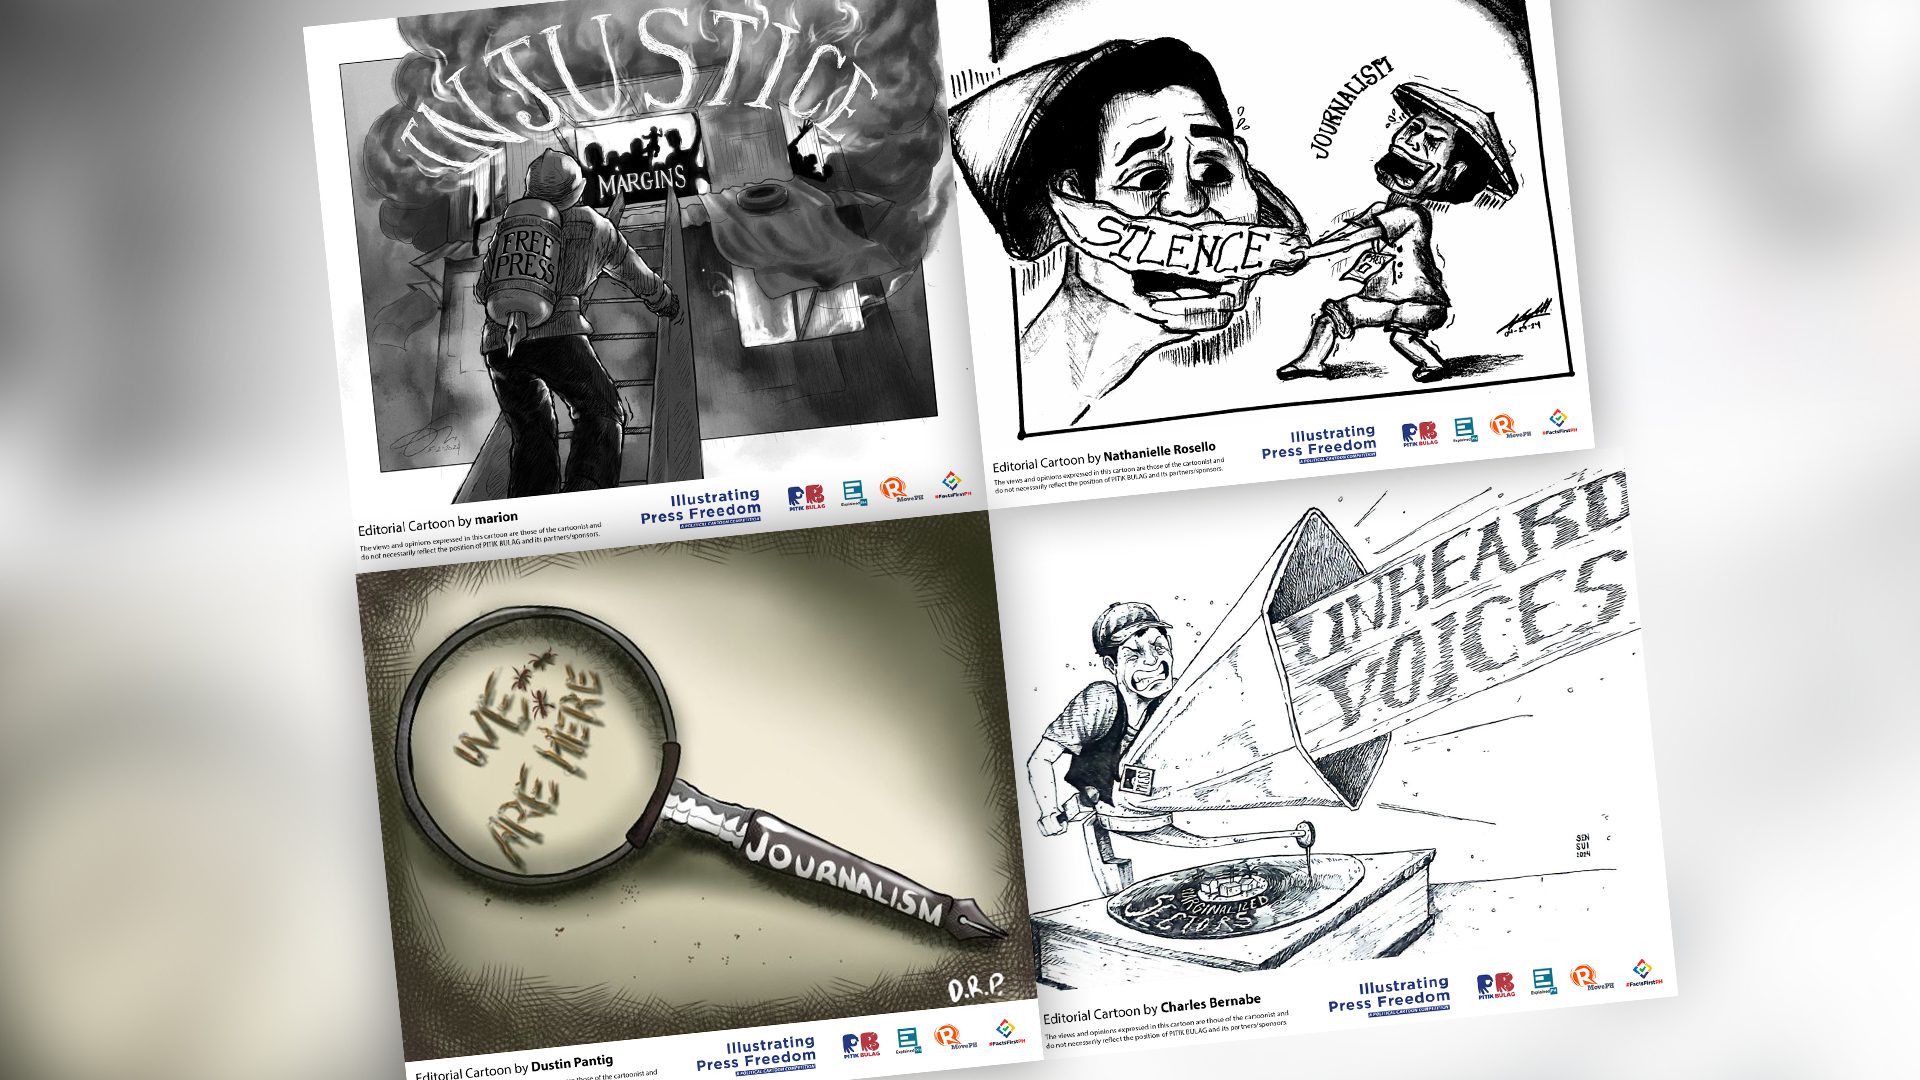 Artists tackle role of journalism through editorial cartoon contest